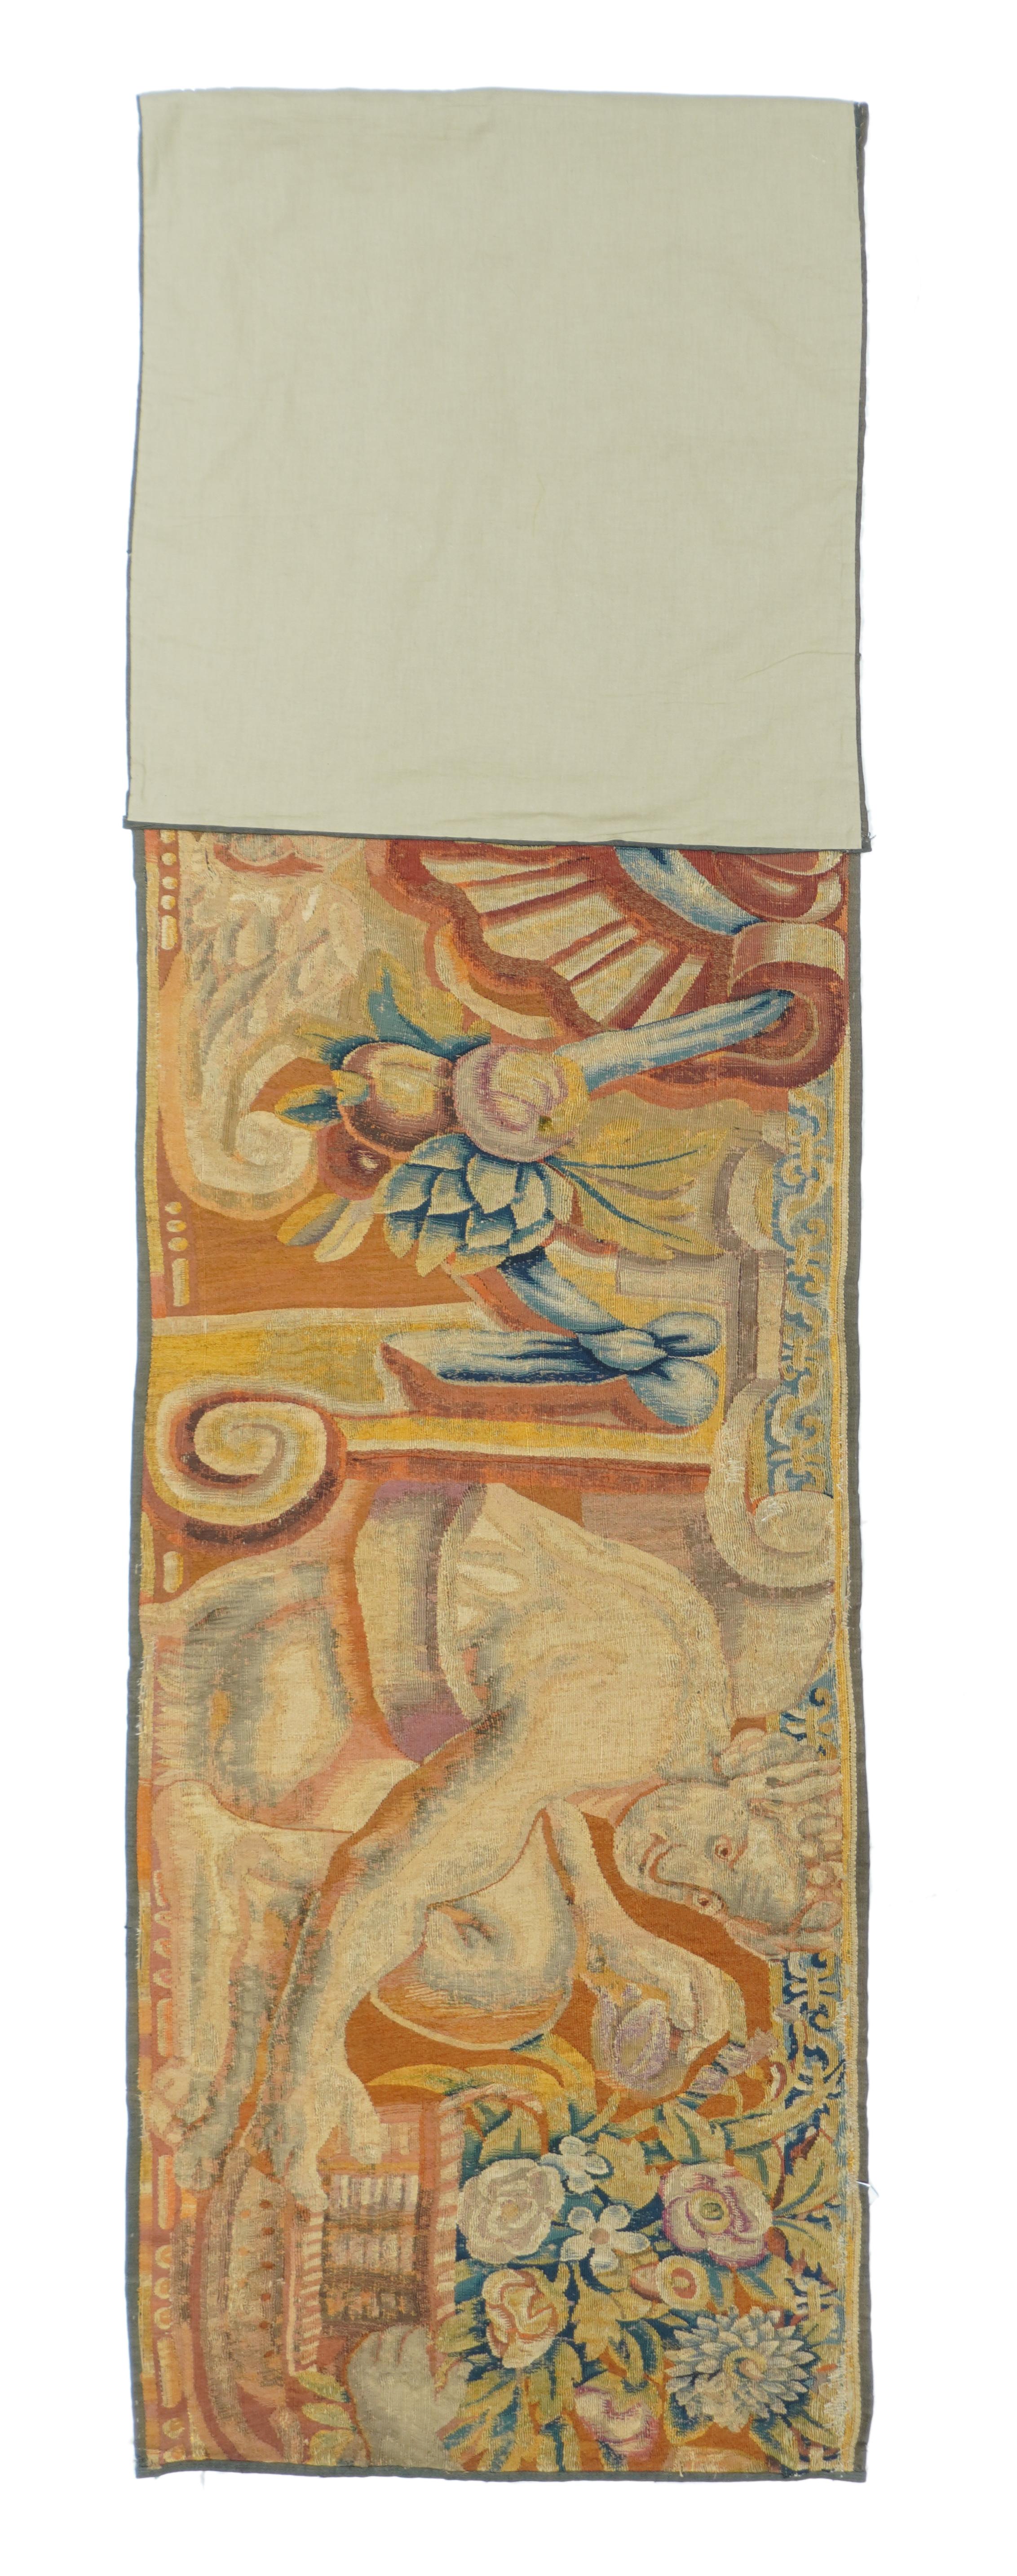 From a Brussels historical or mythological tapestry, matching our 229.
Two crouching male figures hold overflowing flower baskets, and flank a shell-like central motif with attendant fruits and a winged cherubim head below. Trompe l’oeil volute